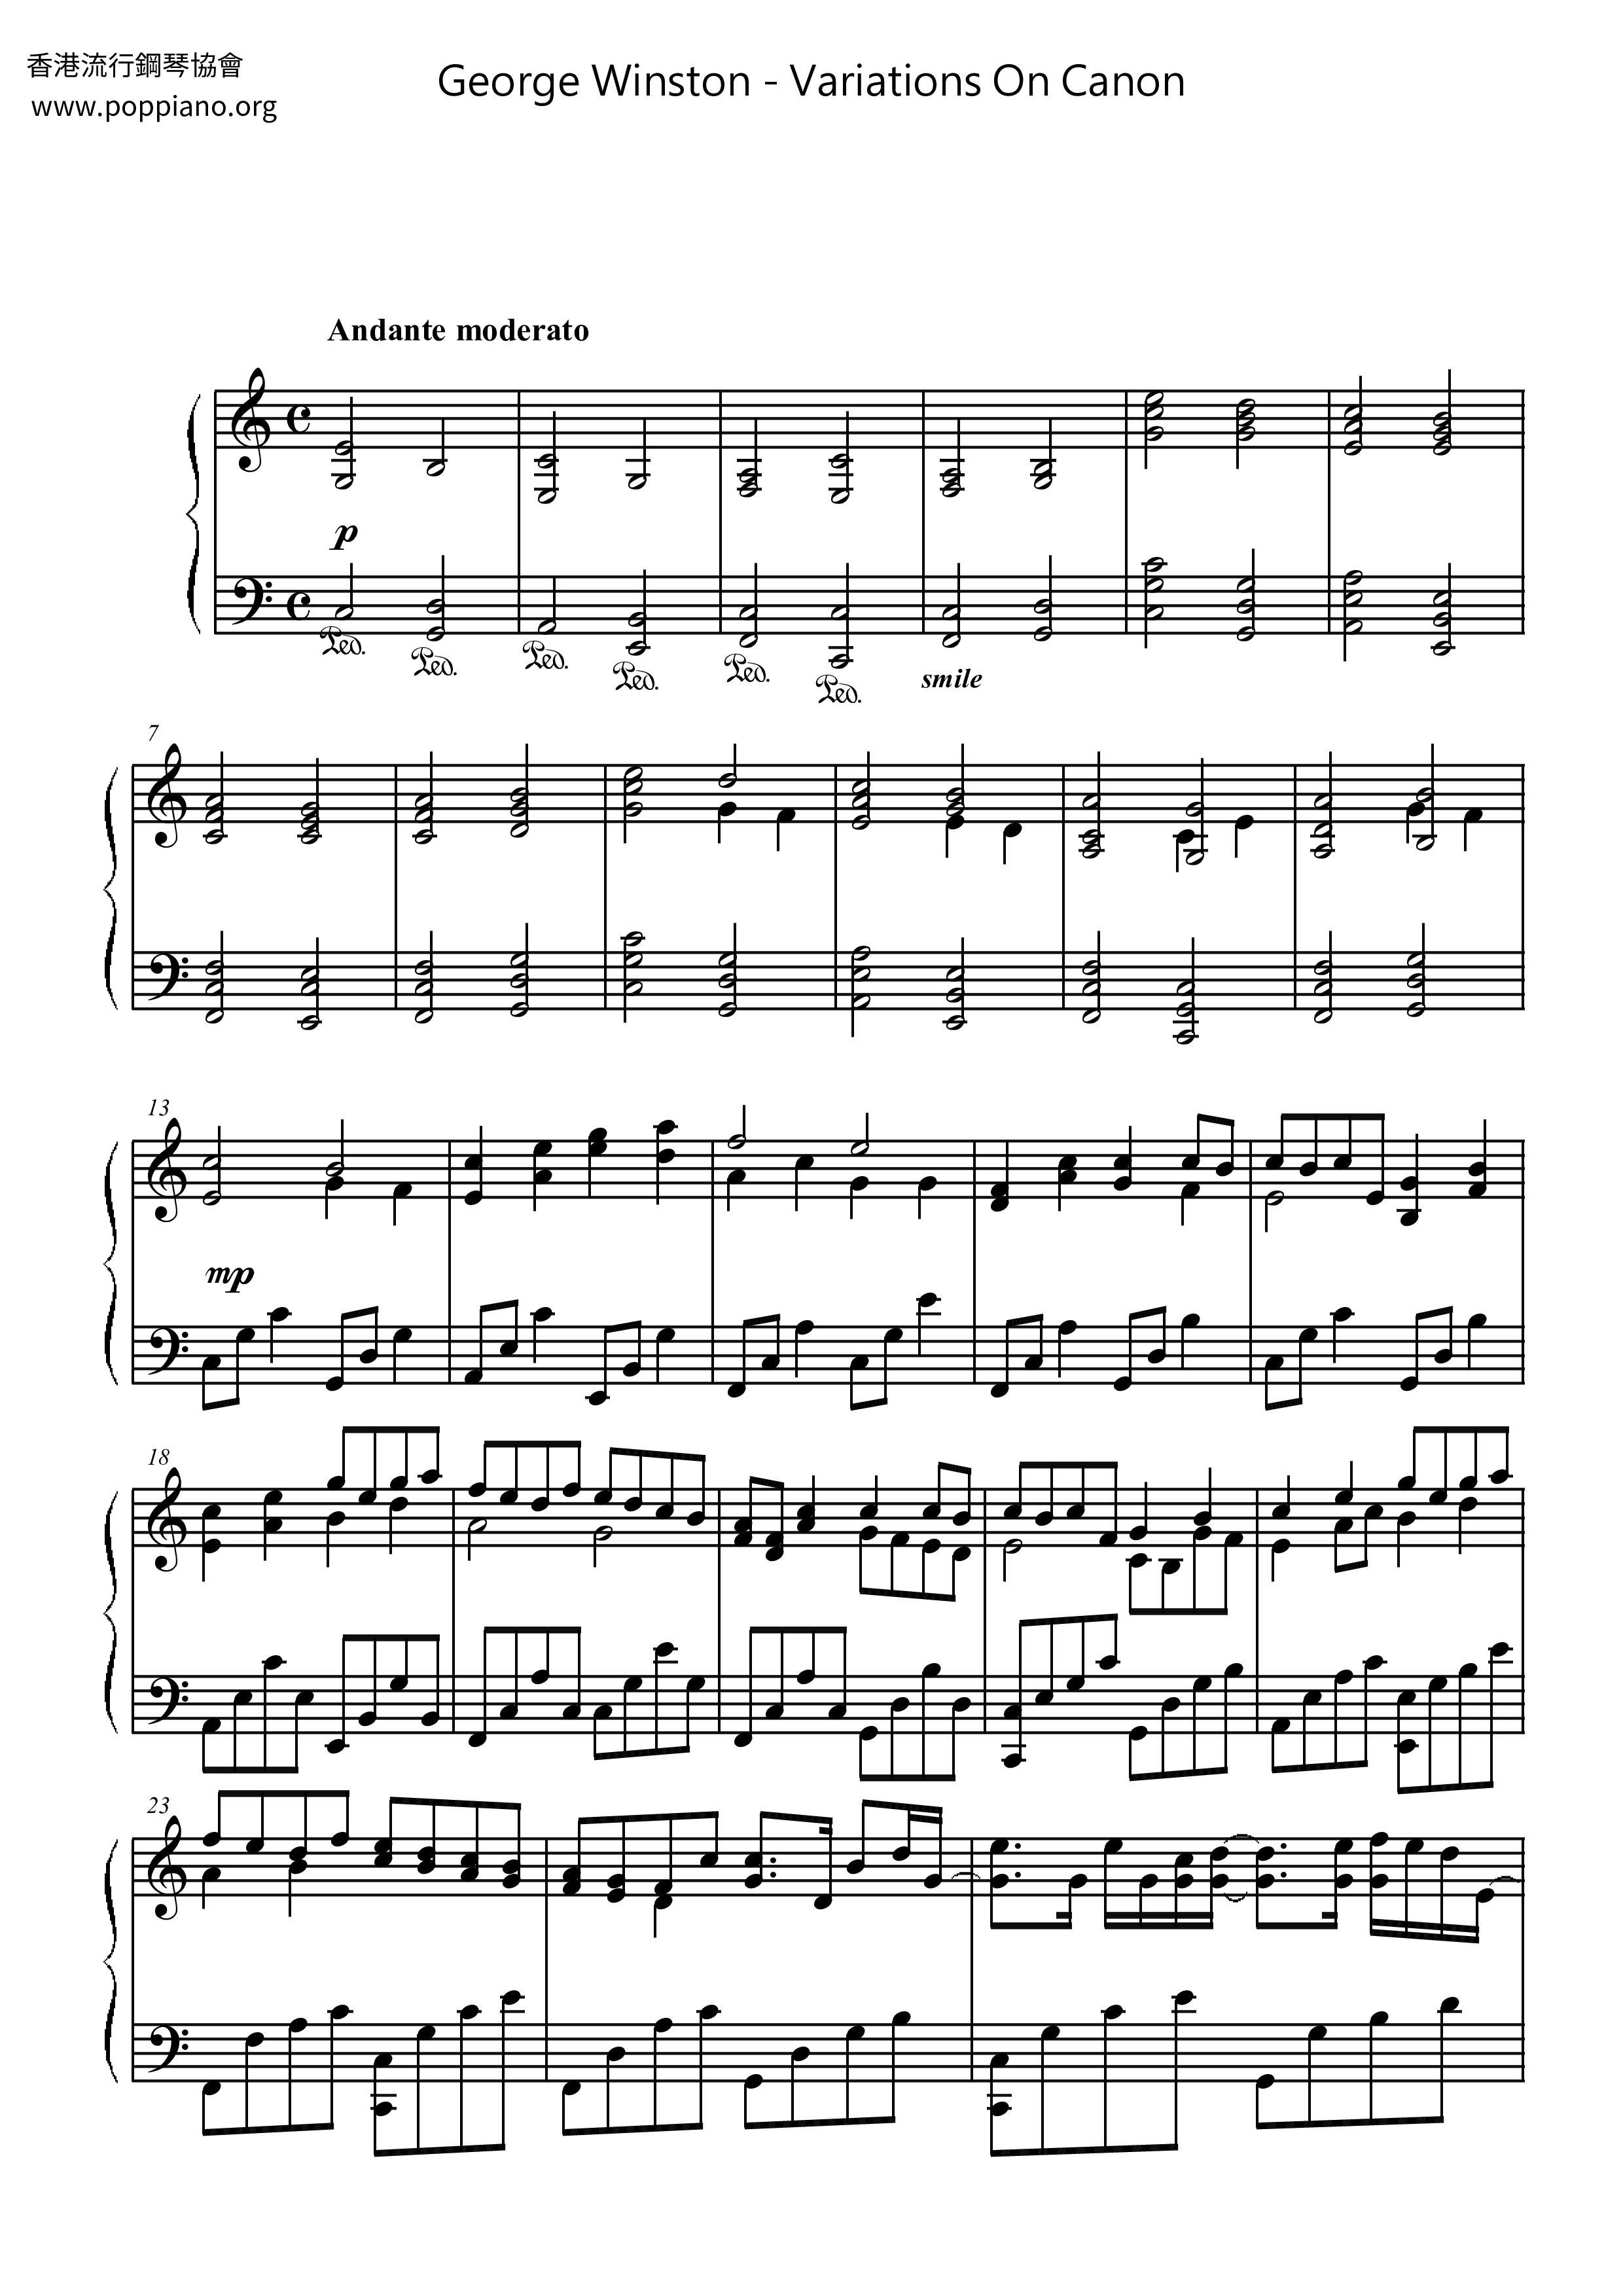 Variations On Canon Score